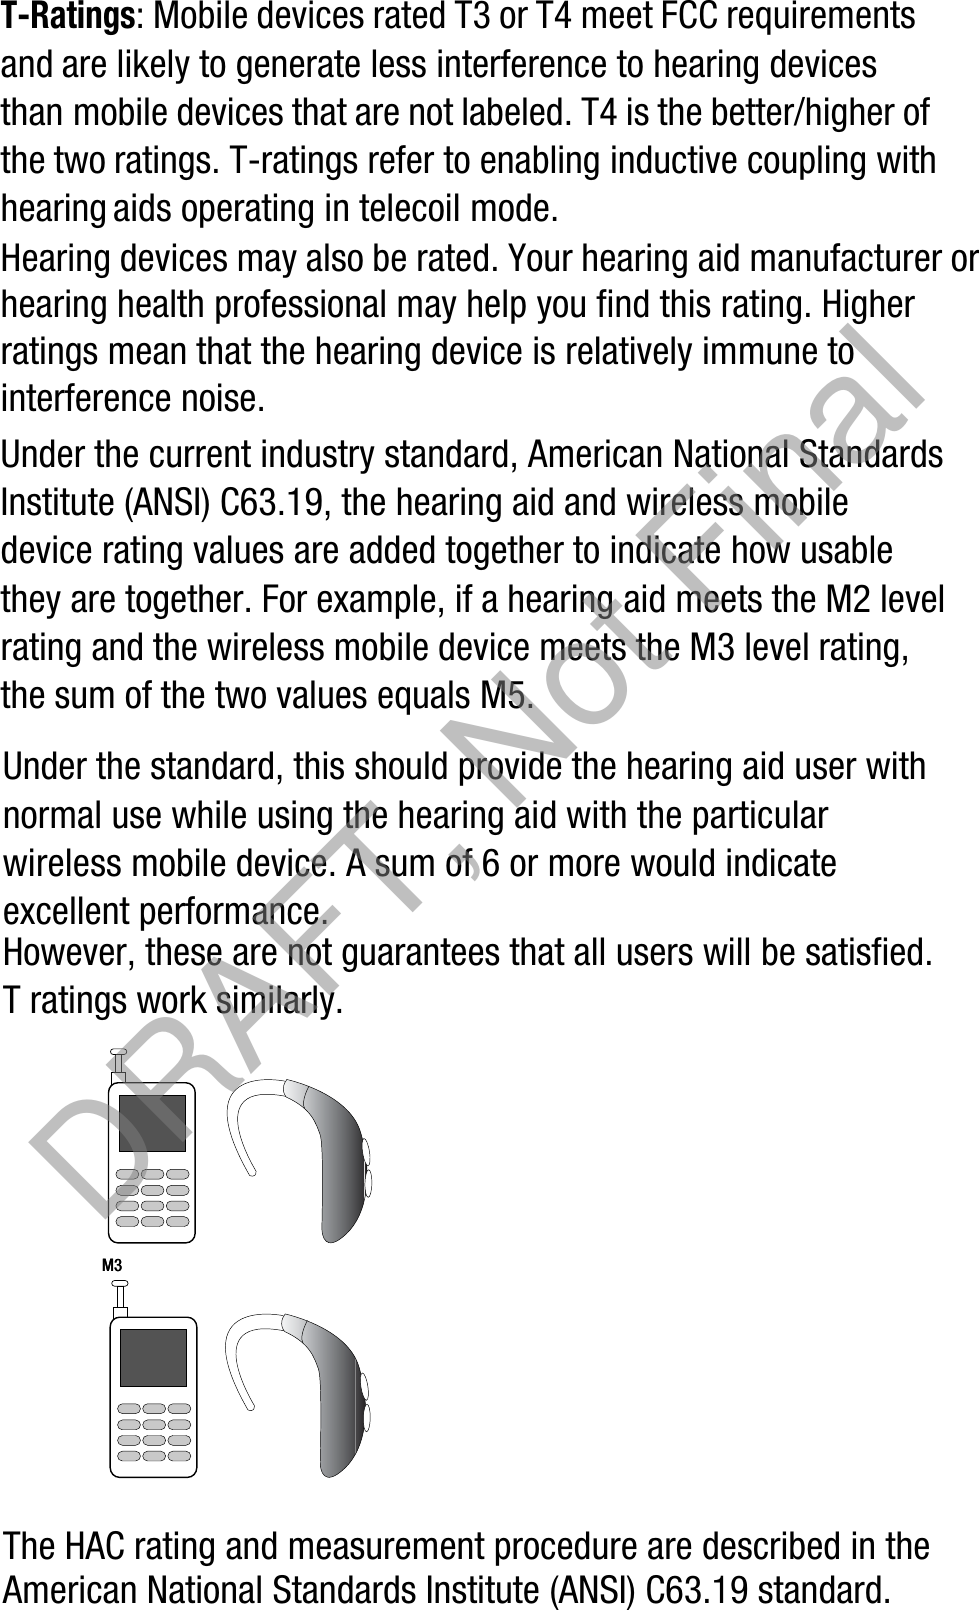 T-Ratings: Mobile devices rated T3 or T4 meet FCC requirements and are likely to generate less interference to hearing devices than mobile devices that are not labeled. T4 is the better/higher of the two ratings. T-ratings refer to enabling inductive coupling with hearing aids operating in telecoil mode.Hearing devices may also be rated. Your hearing aid manufacturer or hearing health professional may help you find this rating. Higher ratings mean that the hearing device is relatively immune to interference noise. Under the current industry standard, American National Standards Institute (ANSI) C63.19, the hearing aid and wireless mobile device rating values are added together to indicate how usable they are together. For example, if a hearing aid meets the M2 level rating and the wireless mobile device meets the M3 level rating, the sum of the two values equals M5. Under the standard, this should provide the hearing aid user with normal use while using the hearing aid with the particular wireless mobile device. A sum of 6 or more would indicate excellent performance.  However, these are not guarantees that all users will be satisfied. T ratings work similarly.The HAC rating and measurement procedure are described in the American National Standards Institute (ANSI) C63.19 standard.M3M3       DRAFT, Not Final